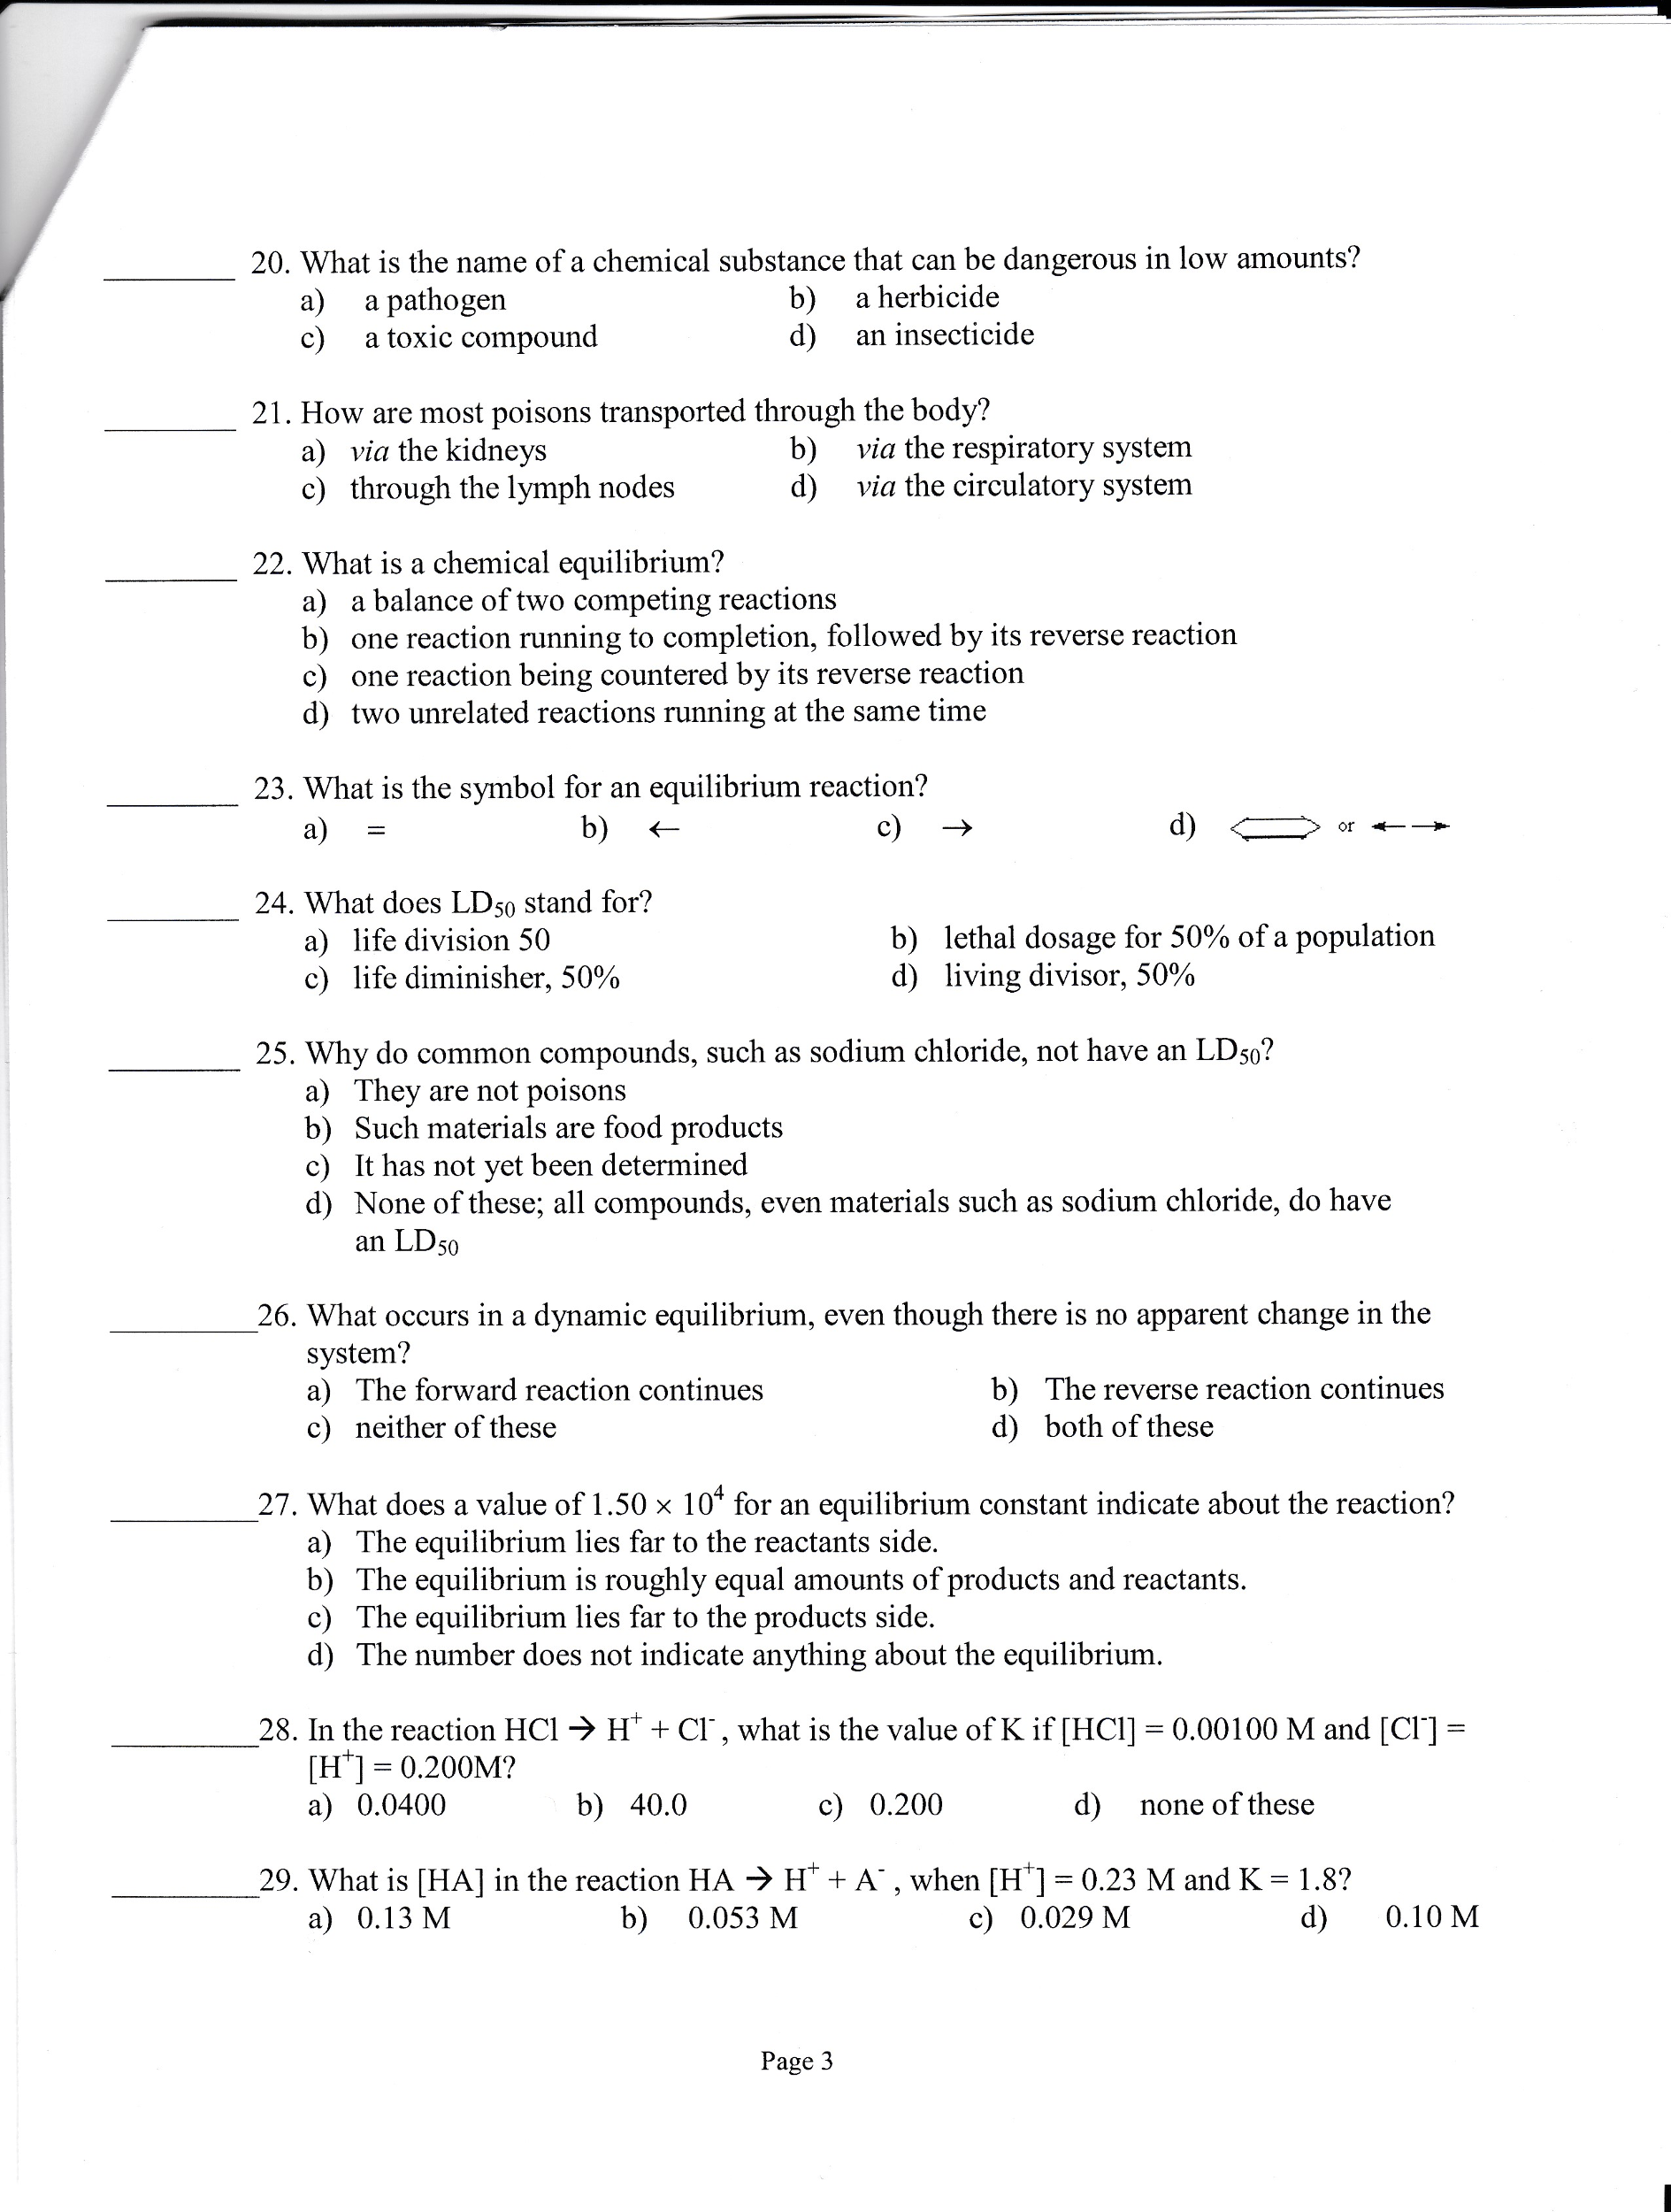 Solved Chemistry Help - Please only answer if truly know the